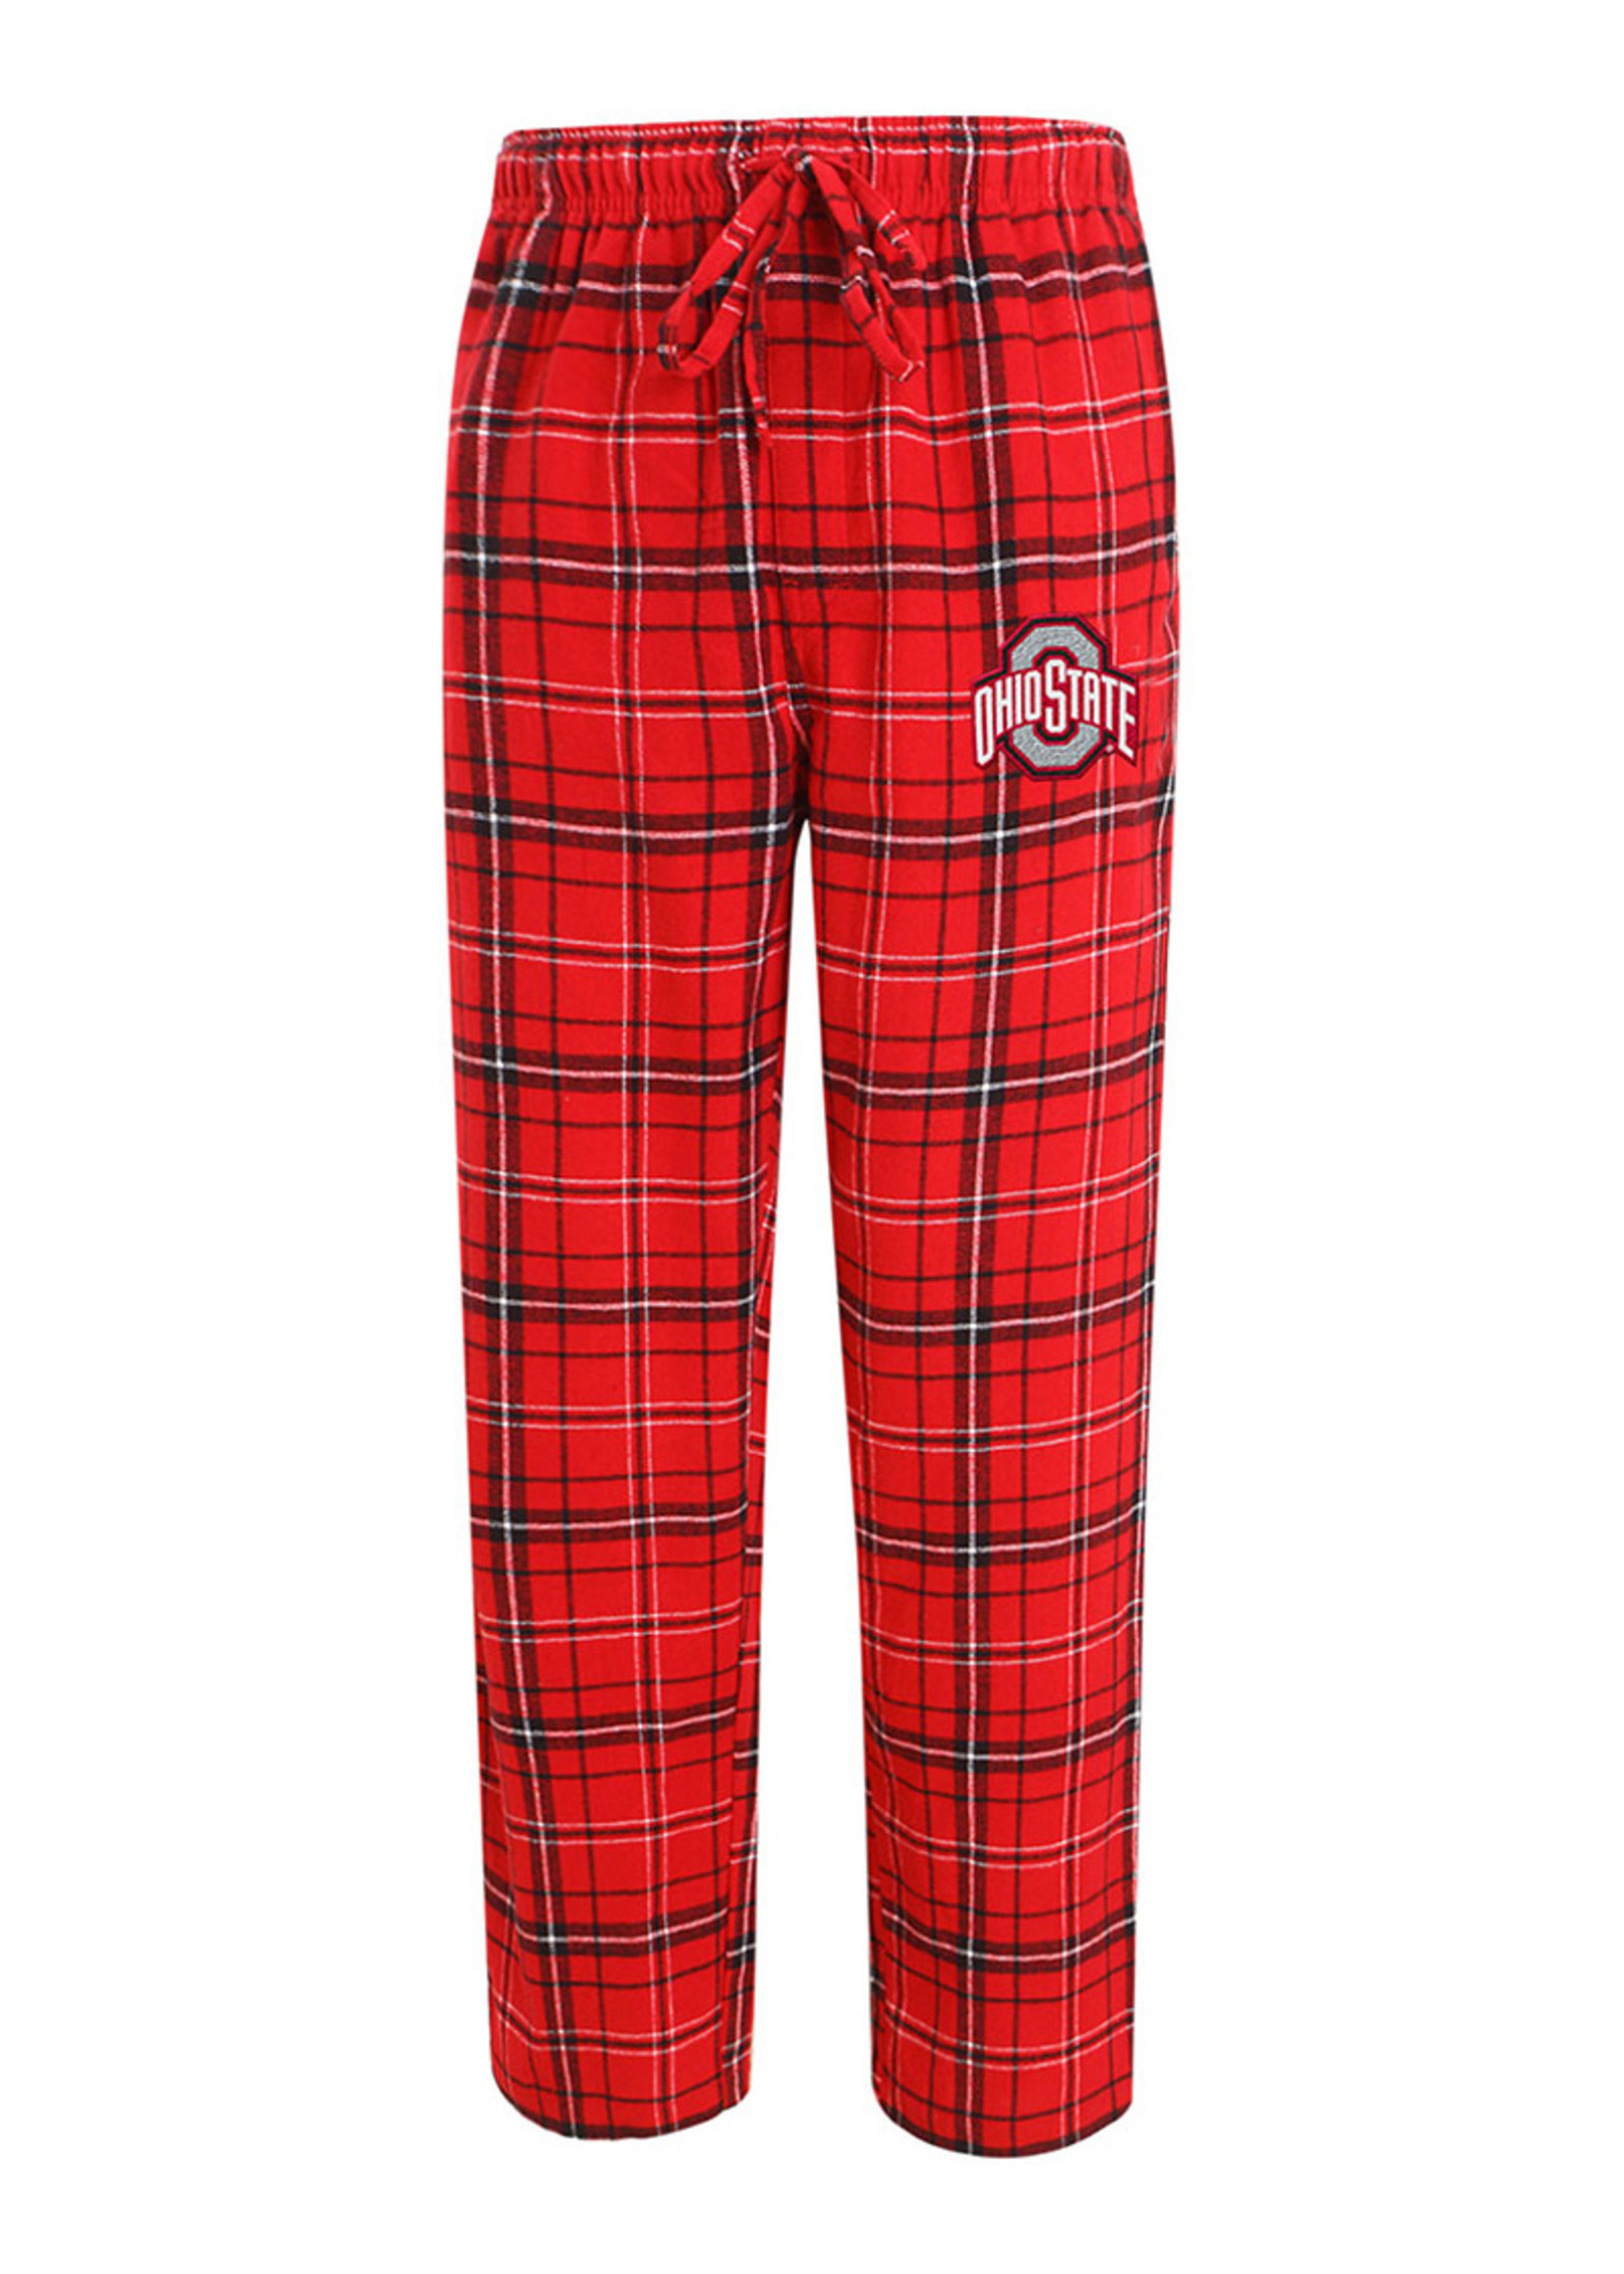 Ohio State Buckeyes Mens Red Plaid Flannel Lounge Pants